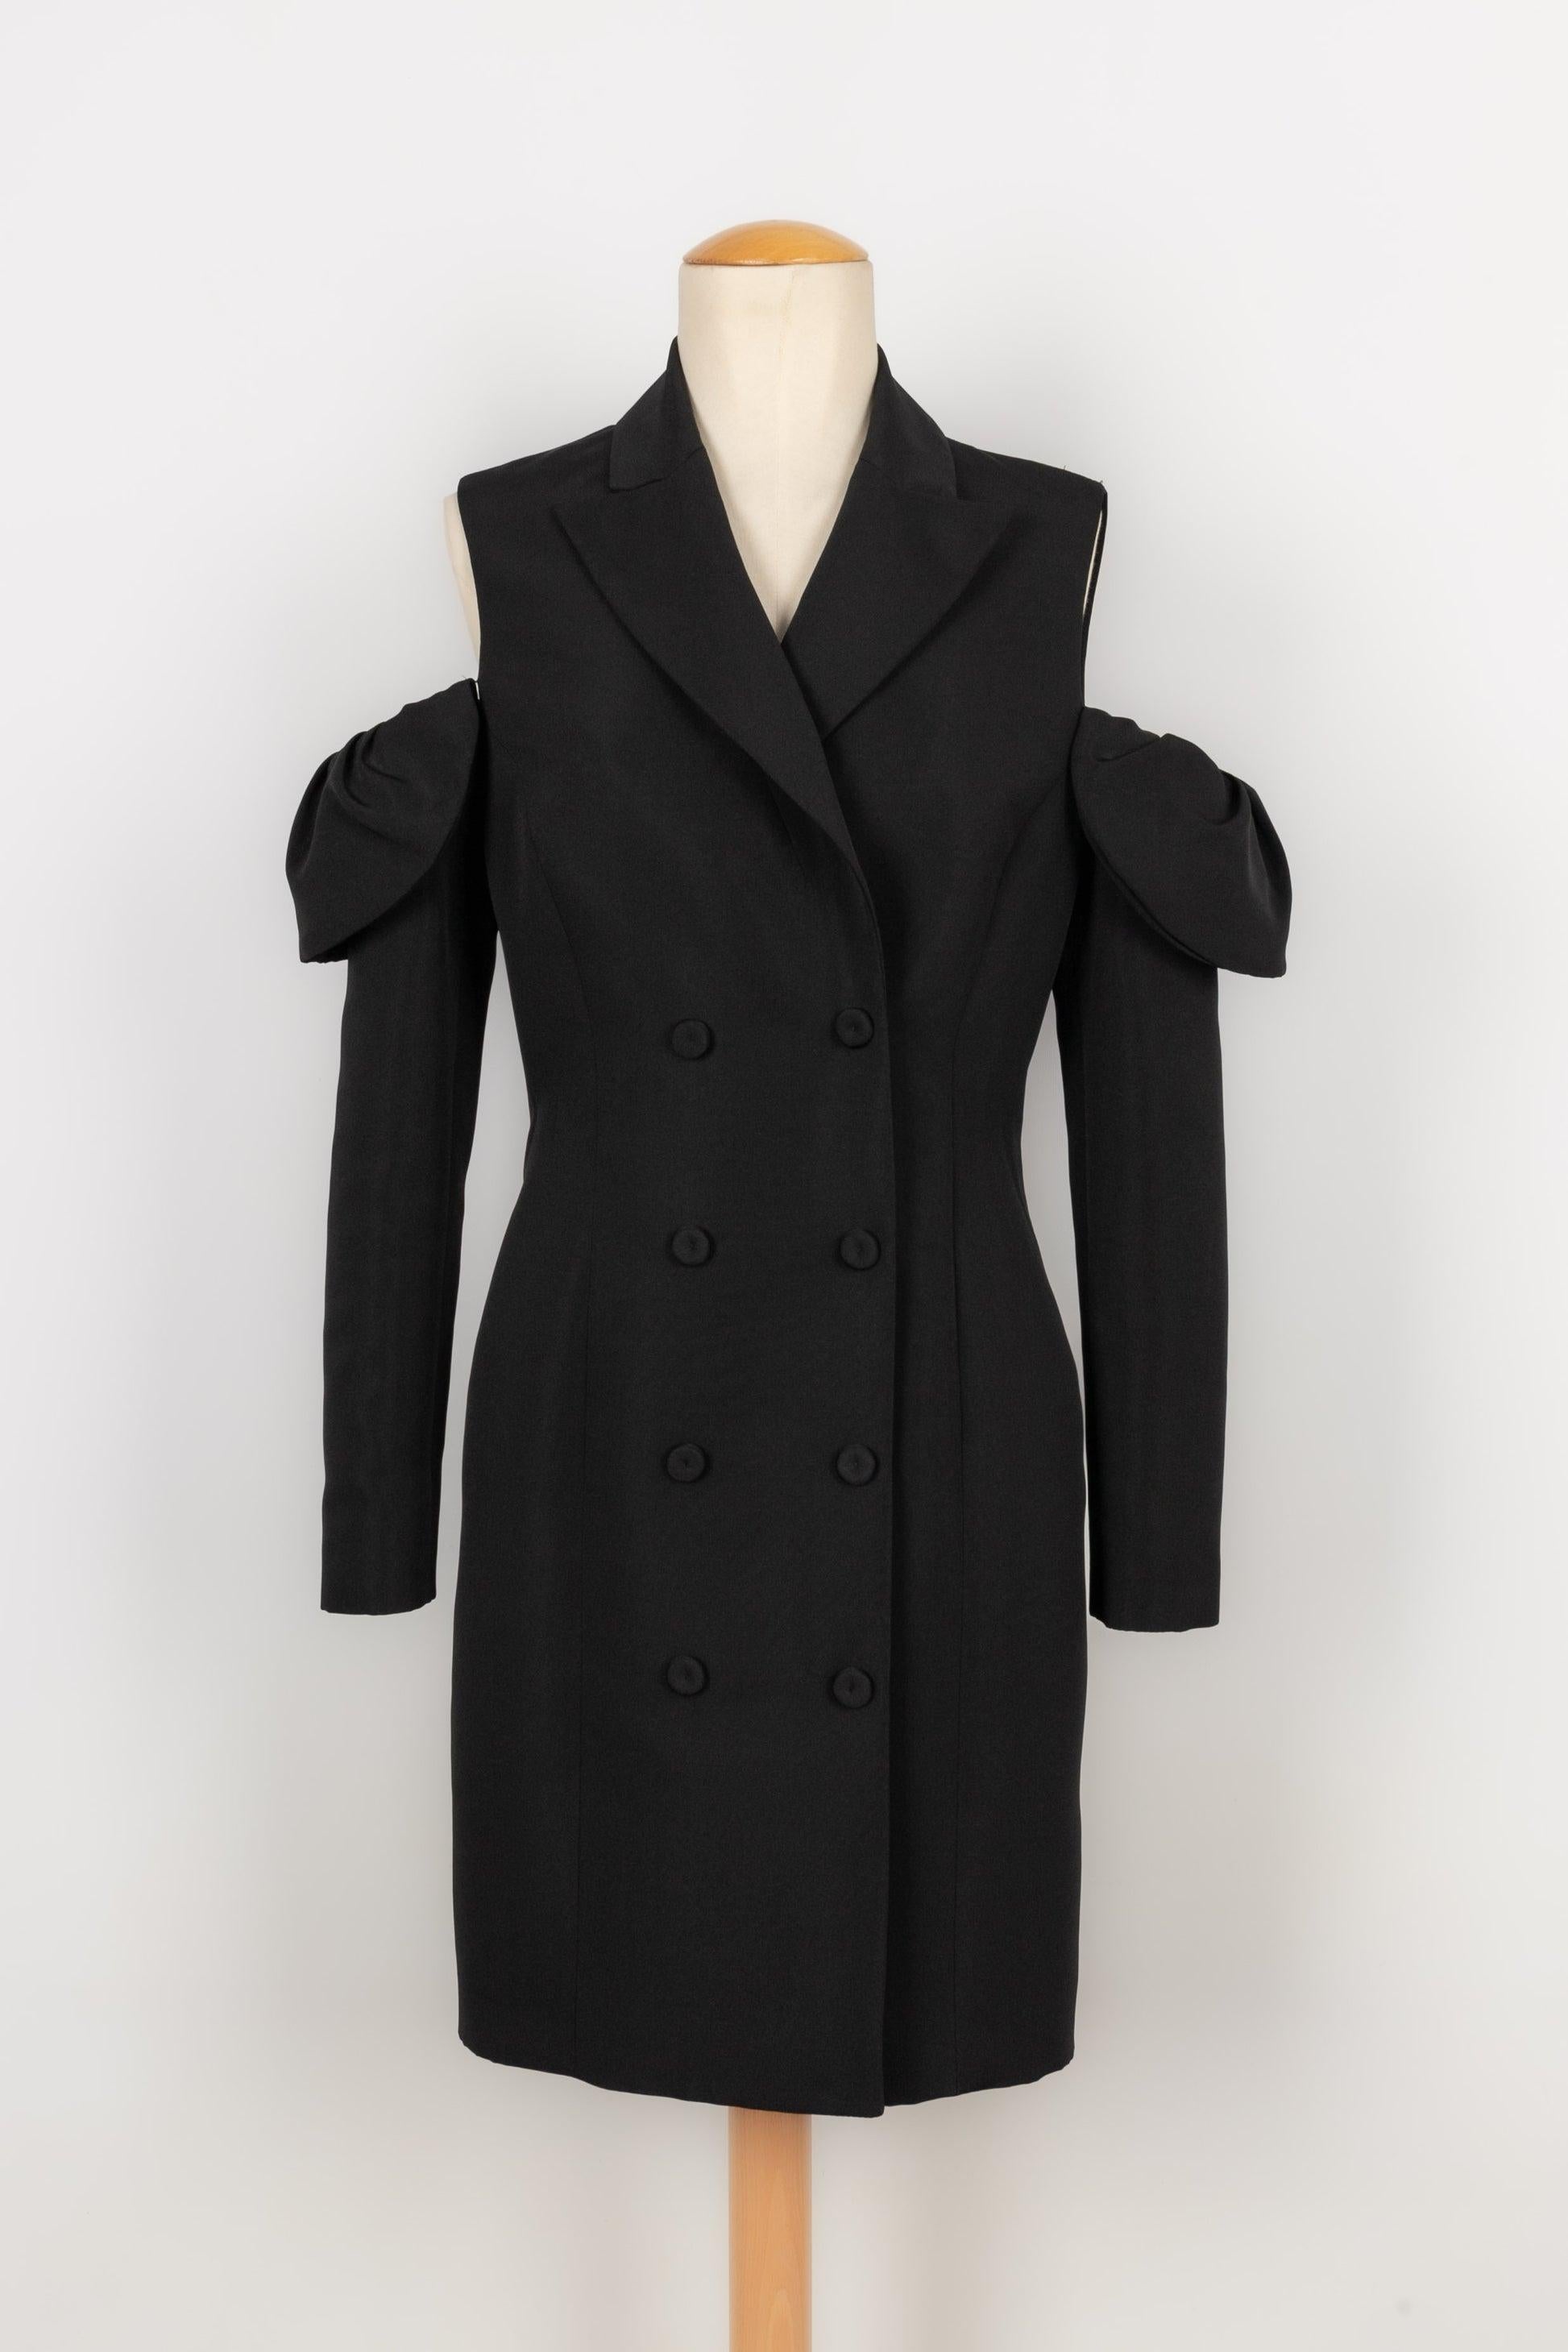 Moschino Bare Shoulders Mid-Length Coat-Style Dress, 2021